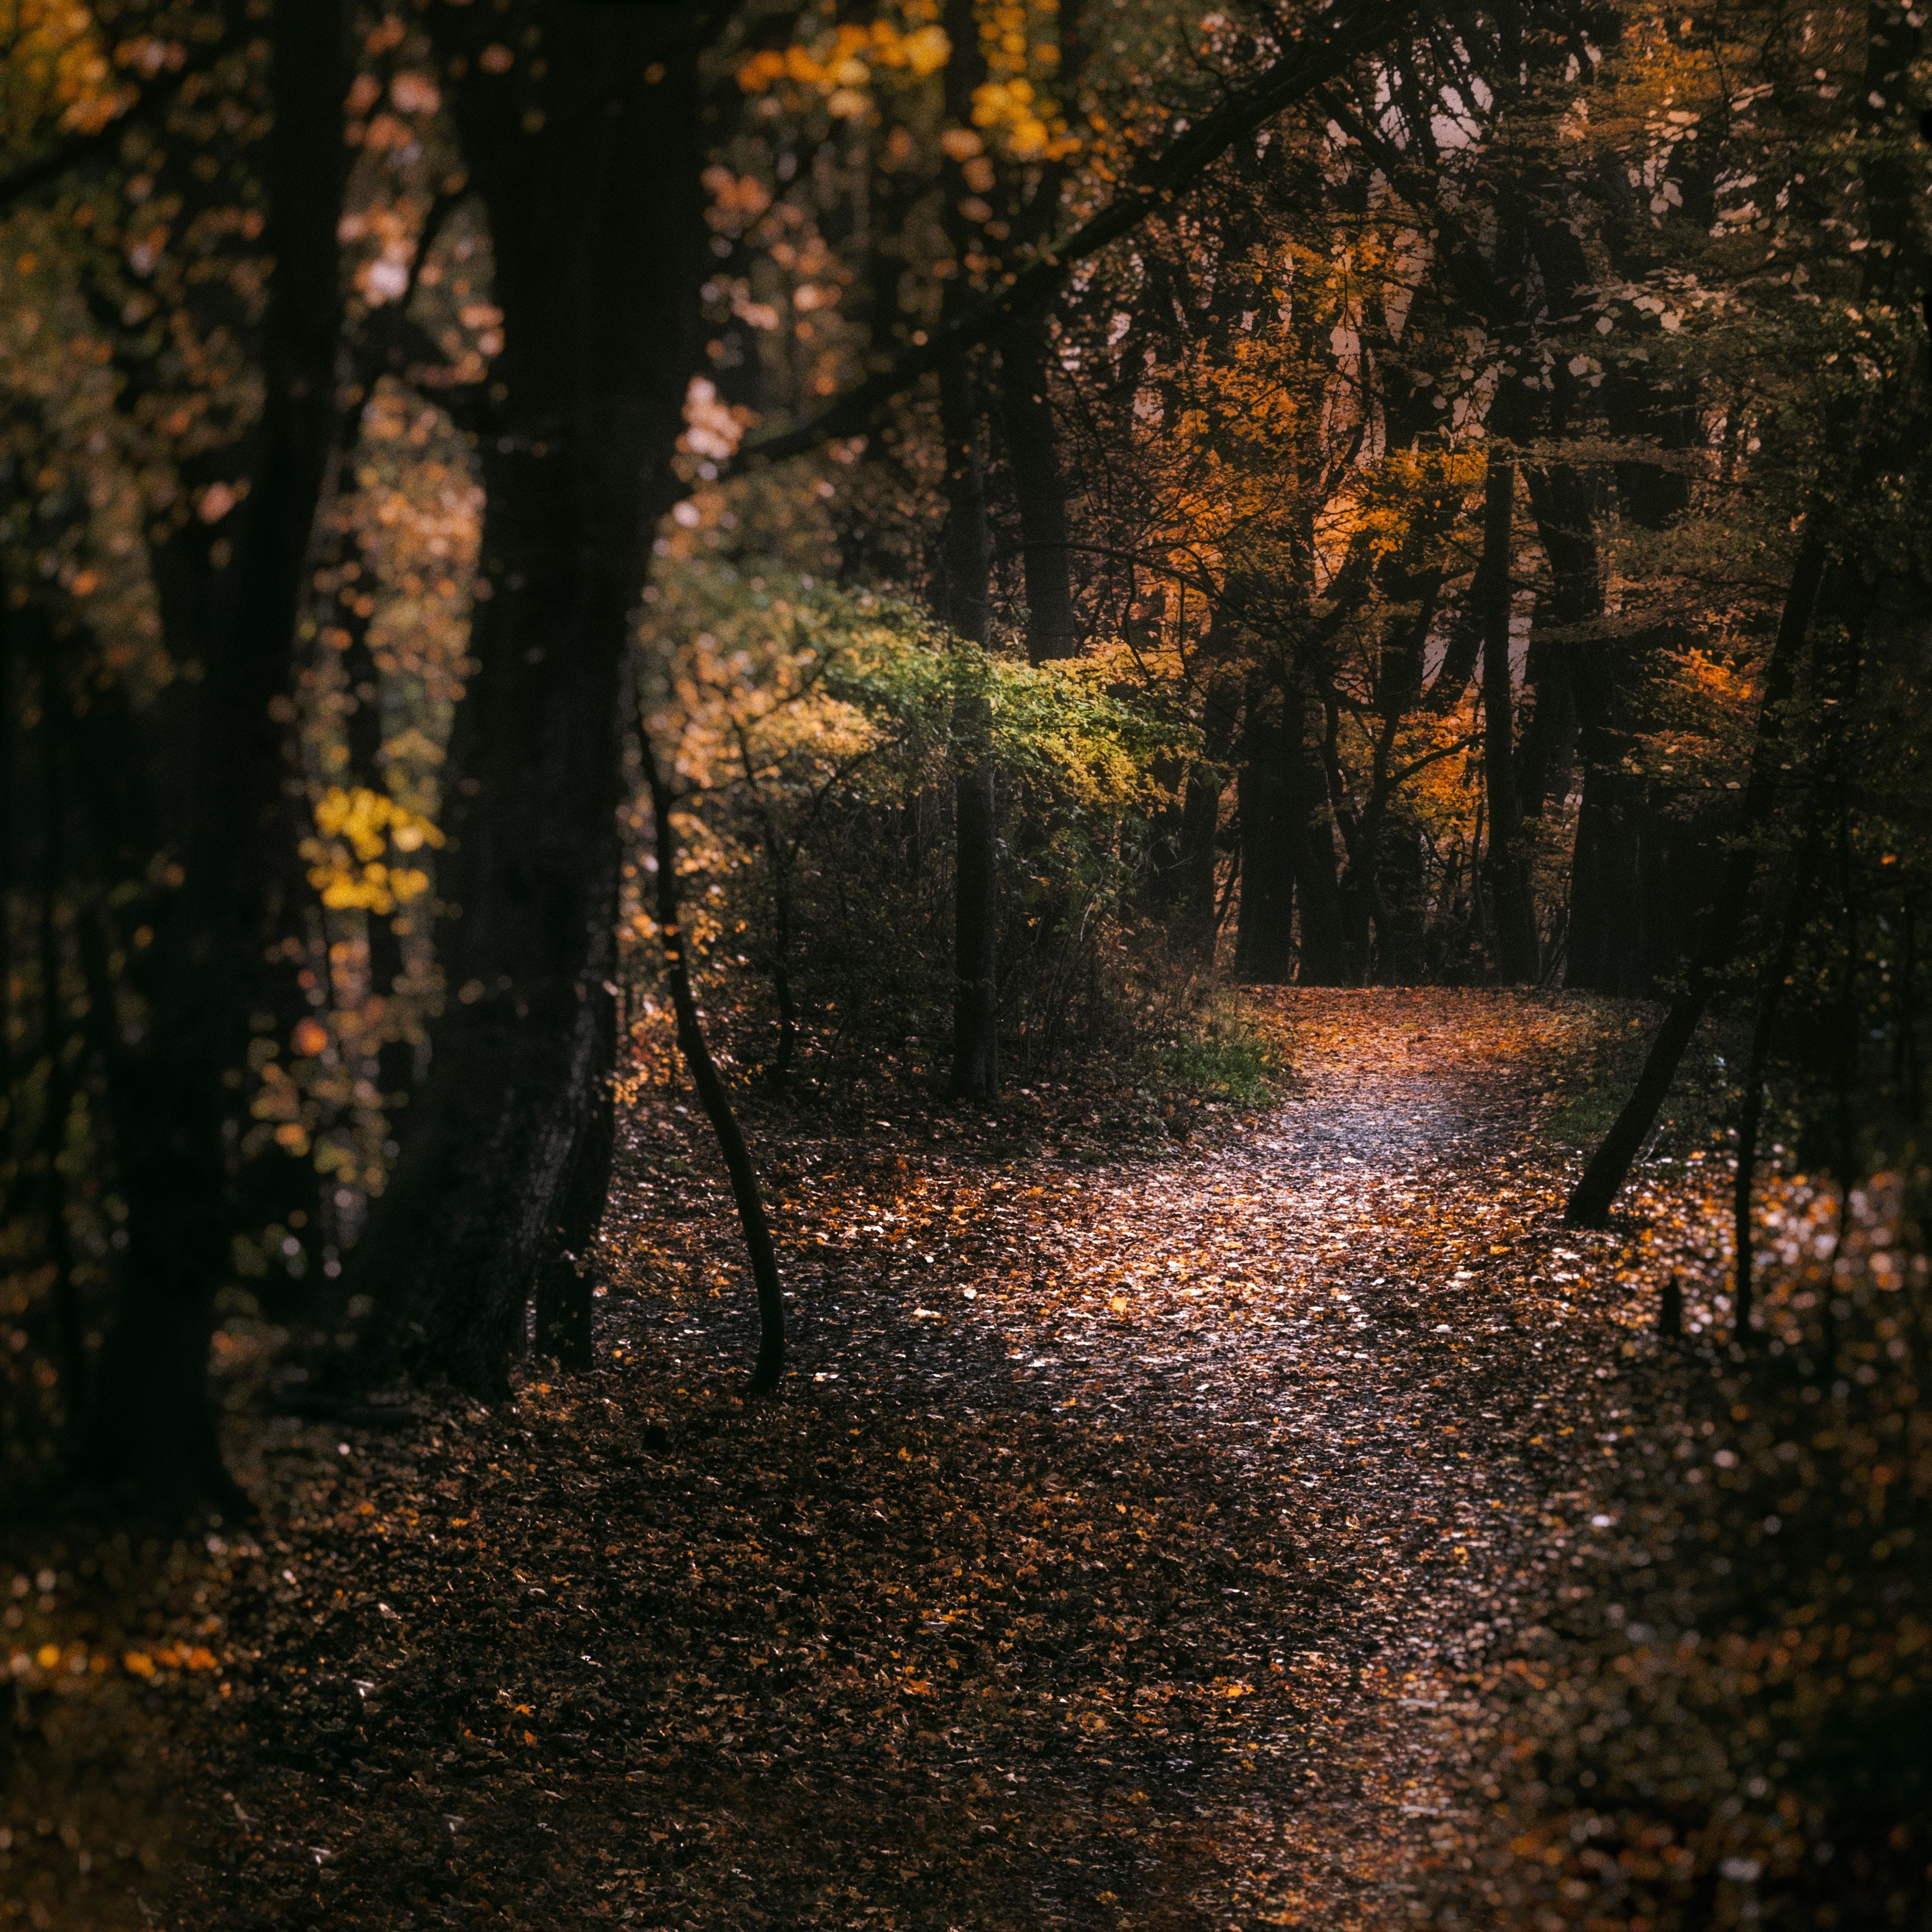 3456x3456 #path, #season, #leaf, #PNG image, #wilderness, #trail, #nature, #atmospheric, #austria, #moody, #autumn, #leaves, #tree, #woodland, #vienna, #wood trail, #fall, #dense forest, #wood, #forest, #track. Mocah.org HD Desktop Wallpaper